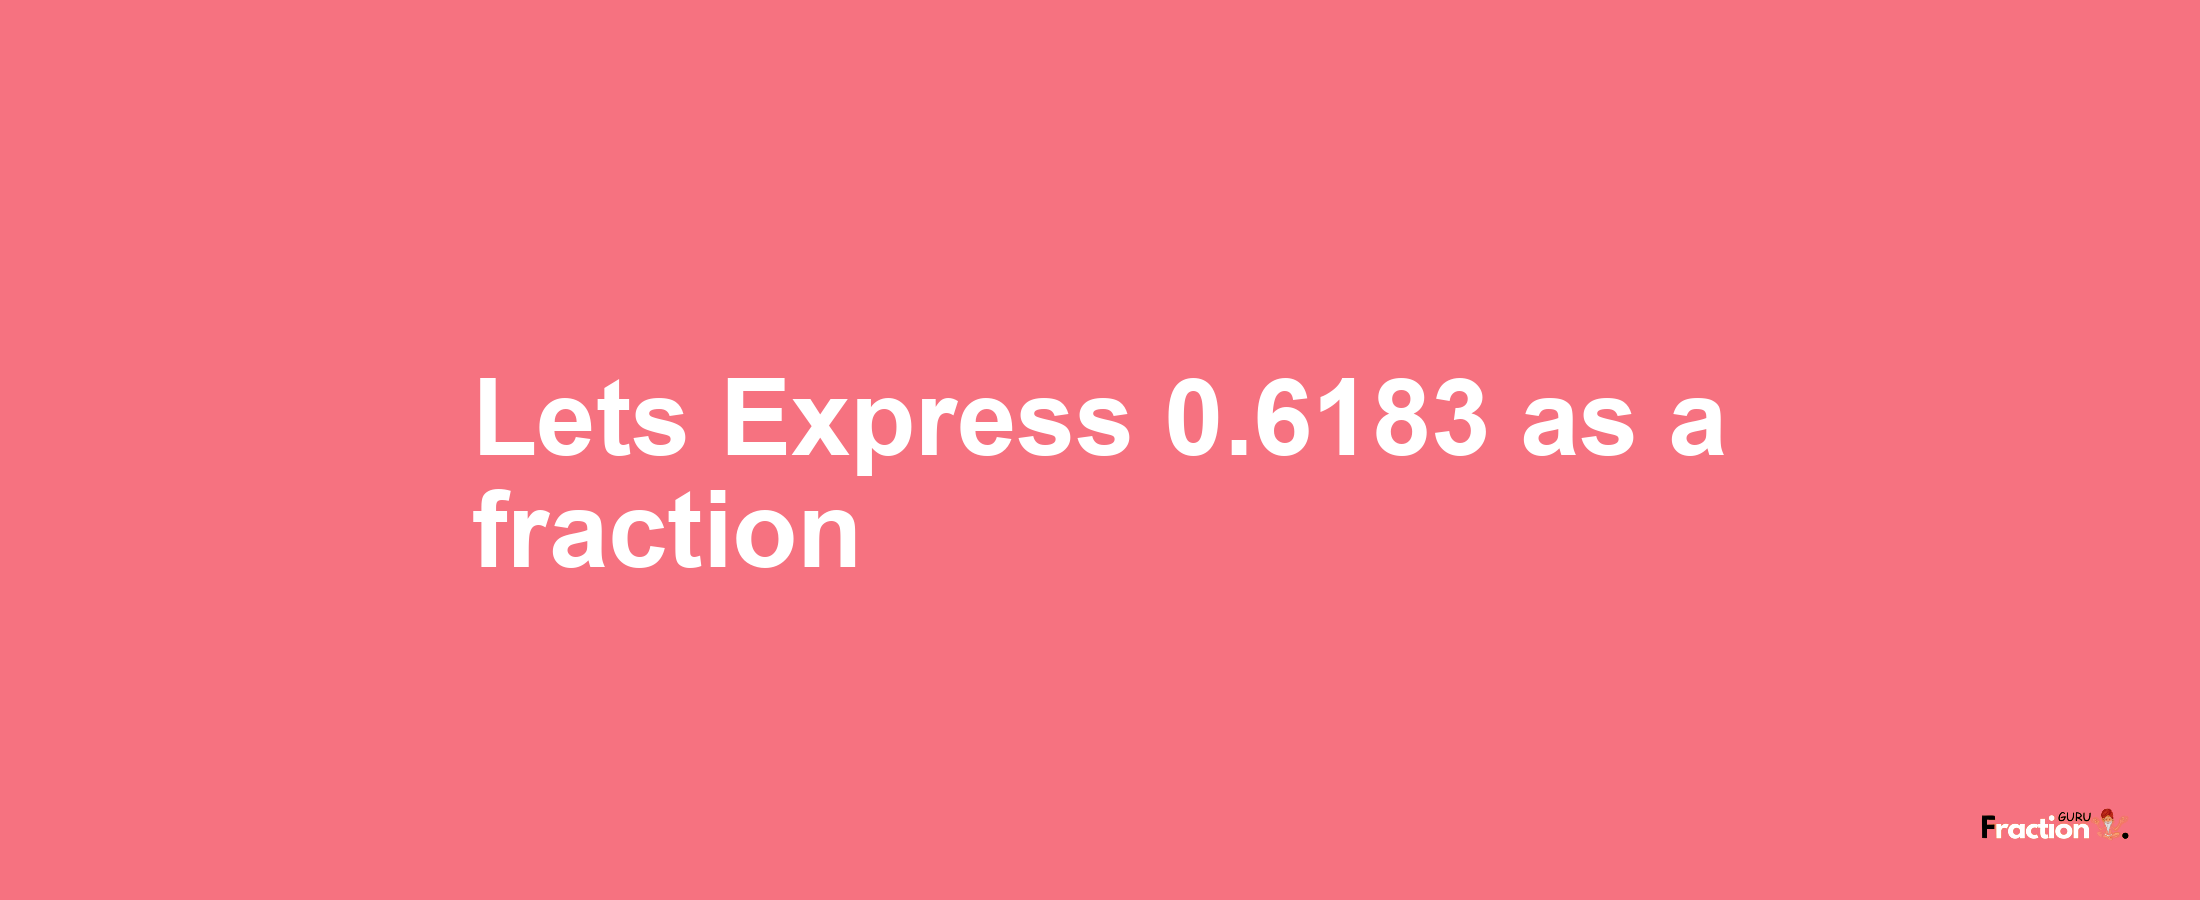 Lets Express 0.6183 as afraction